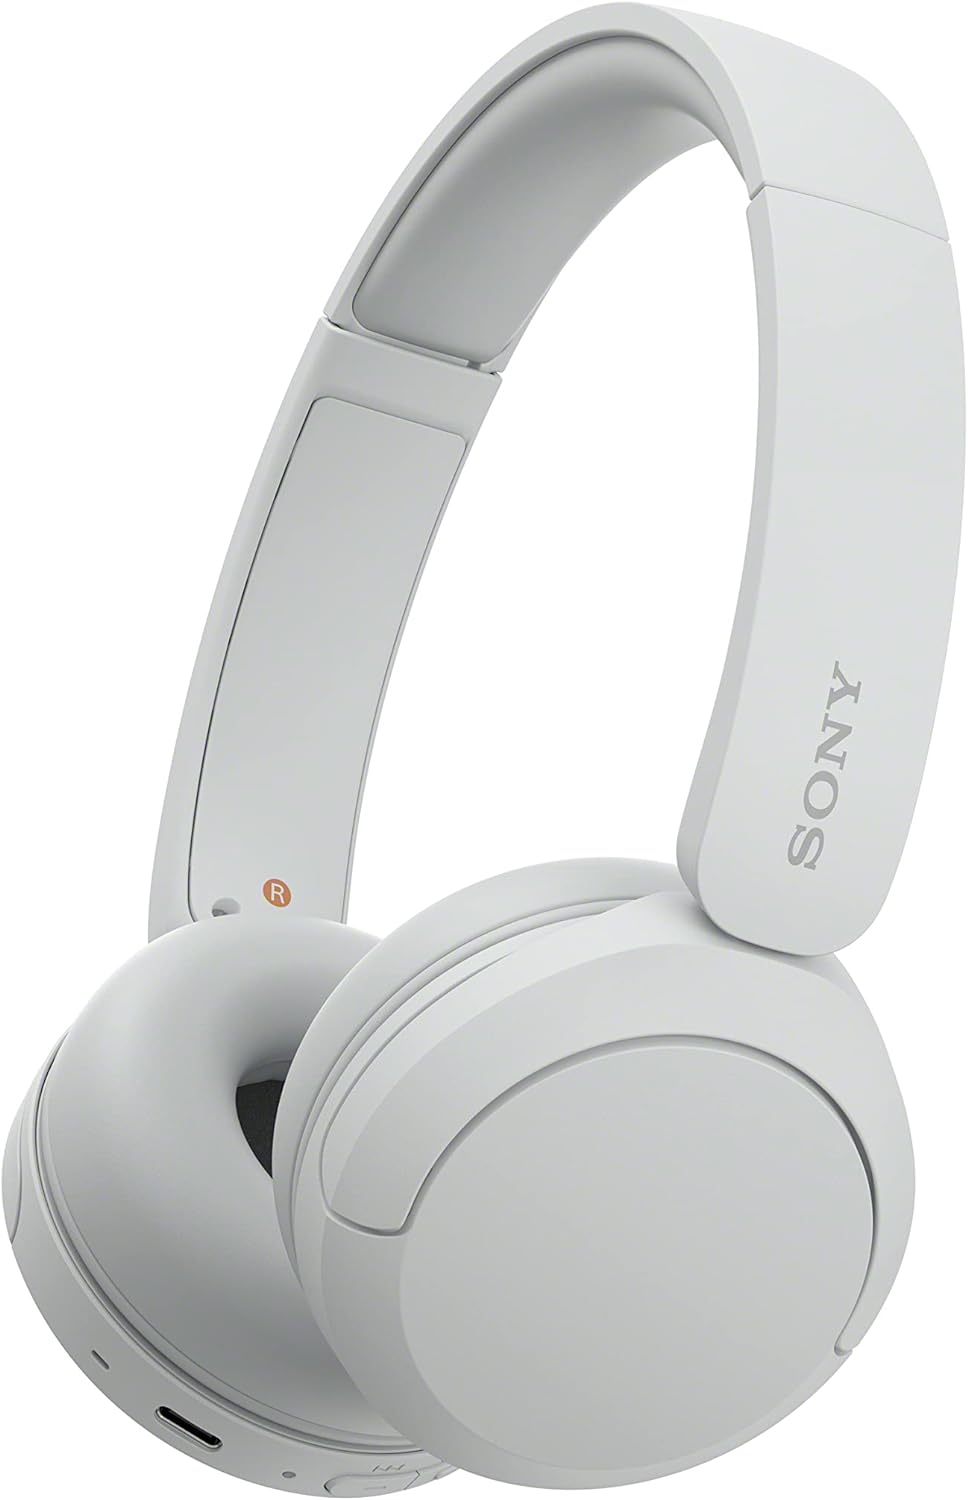 Sony Wireless Bluetooth Headphones Review: Style and Functionality in a Sleek Design